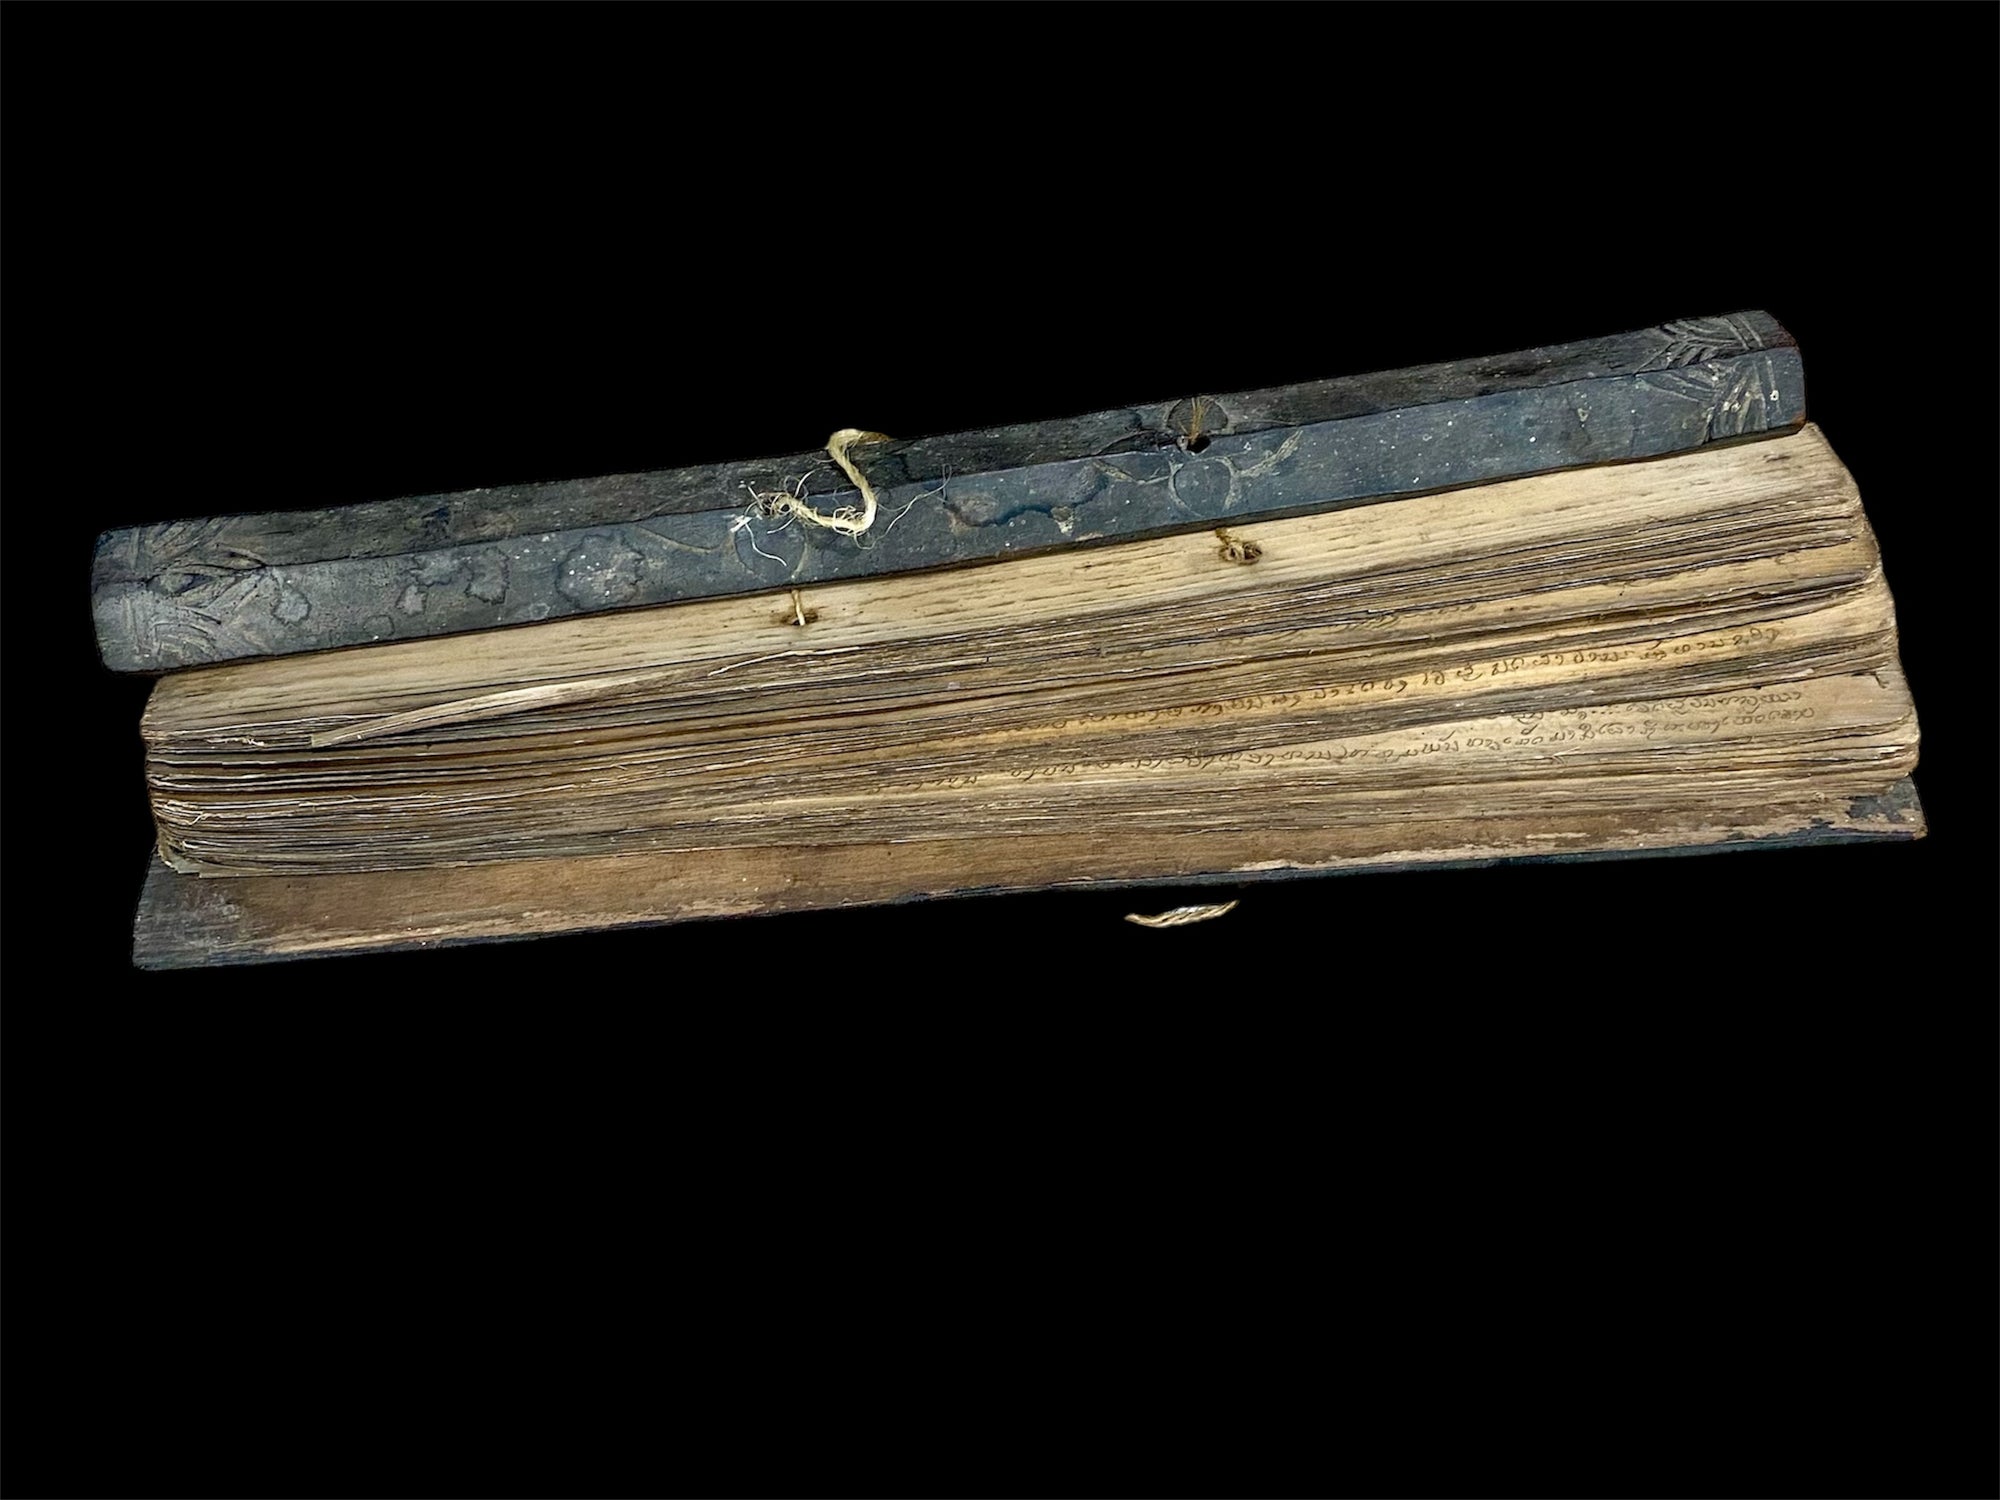 Sinhalese palm (ola) leaf book, ca. early 20th century CE. South Asia. Religious text from a Hindu-Buddhist monastery. Contains 60 leaves bound by two cords between a pair of wood slat covers. Measurements: Length 56 cm (22") x height 7.5 cm (3") x width 4.5 cm (1.75")